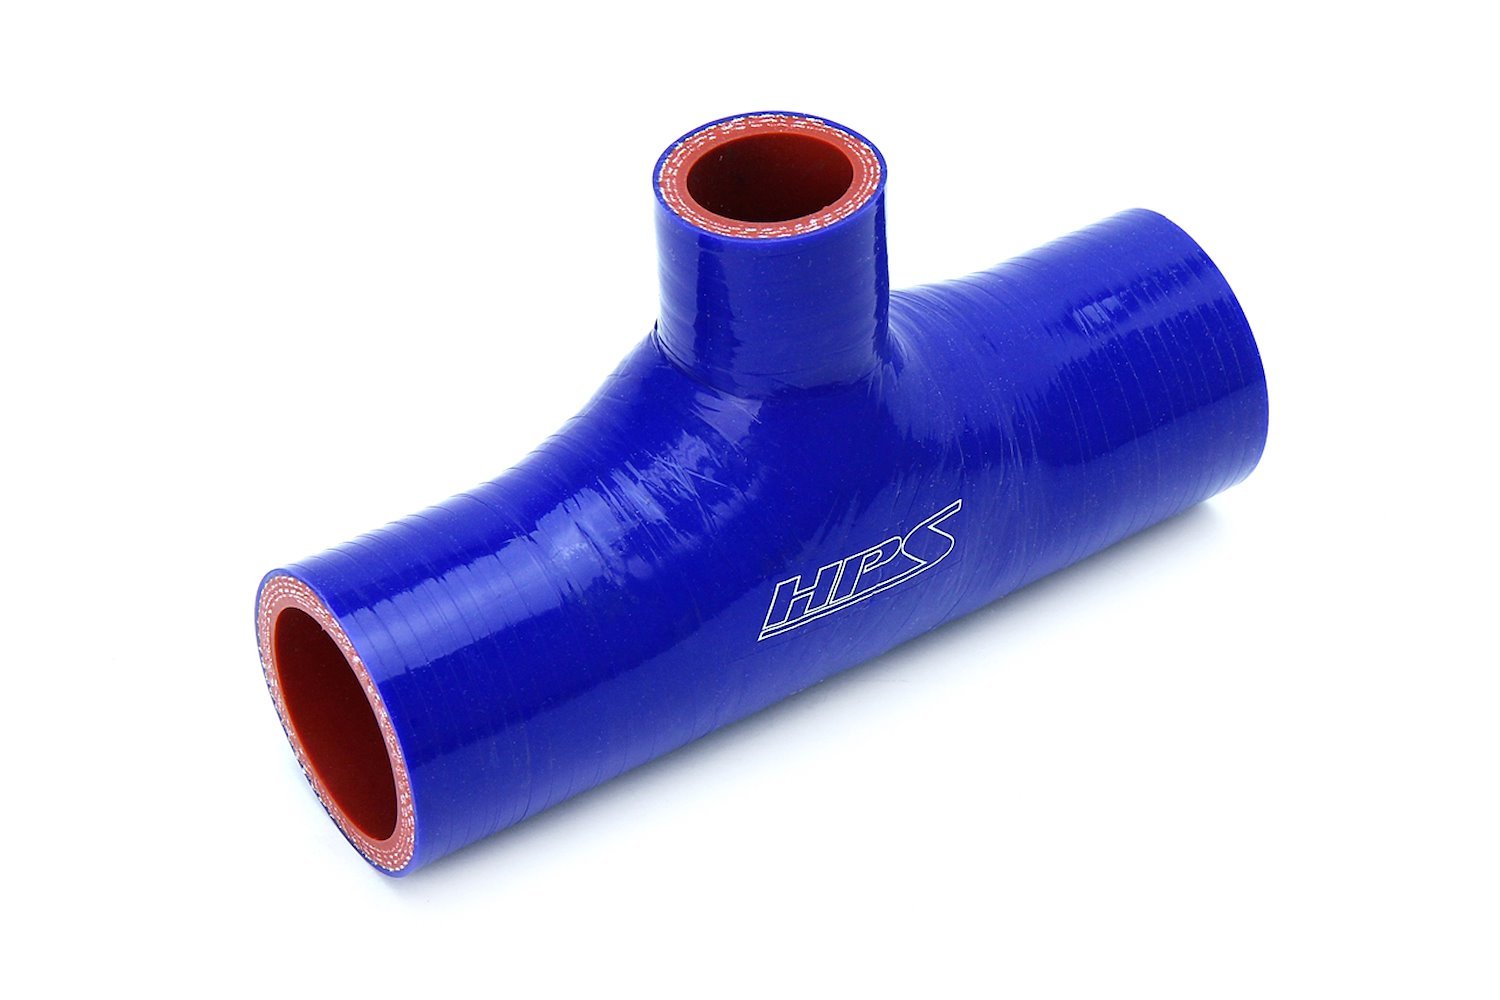 125-THOSE-100-BLUE Silicone Tee Hose Adapter, High-Temp 4-Ply Reinforced, 1-1/4 in. ID, Blue